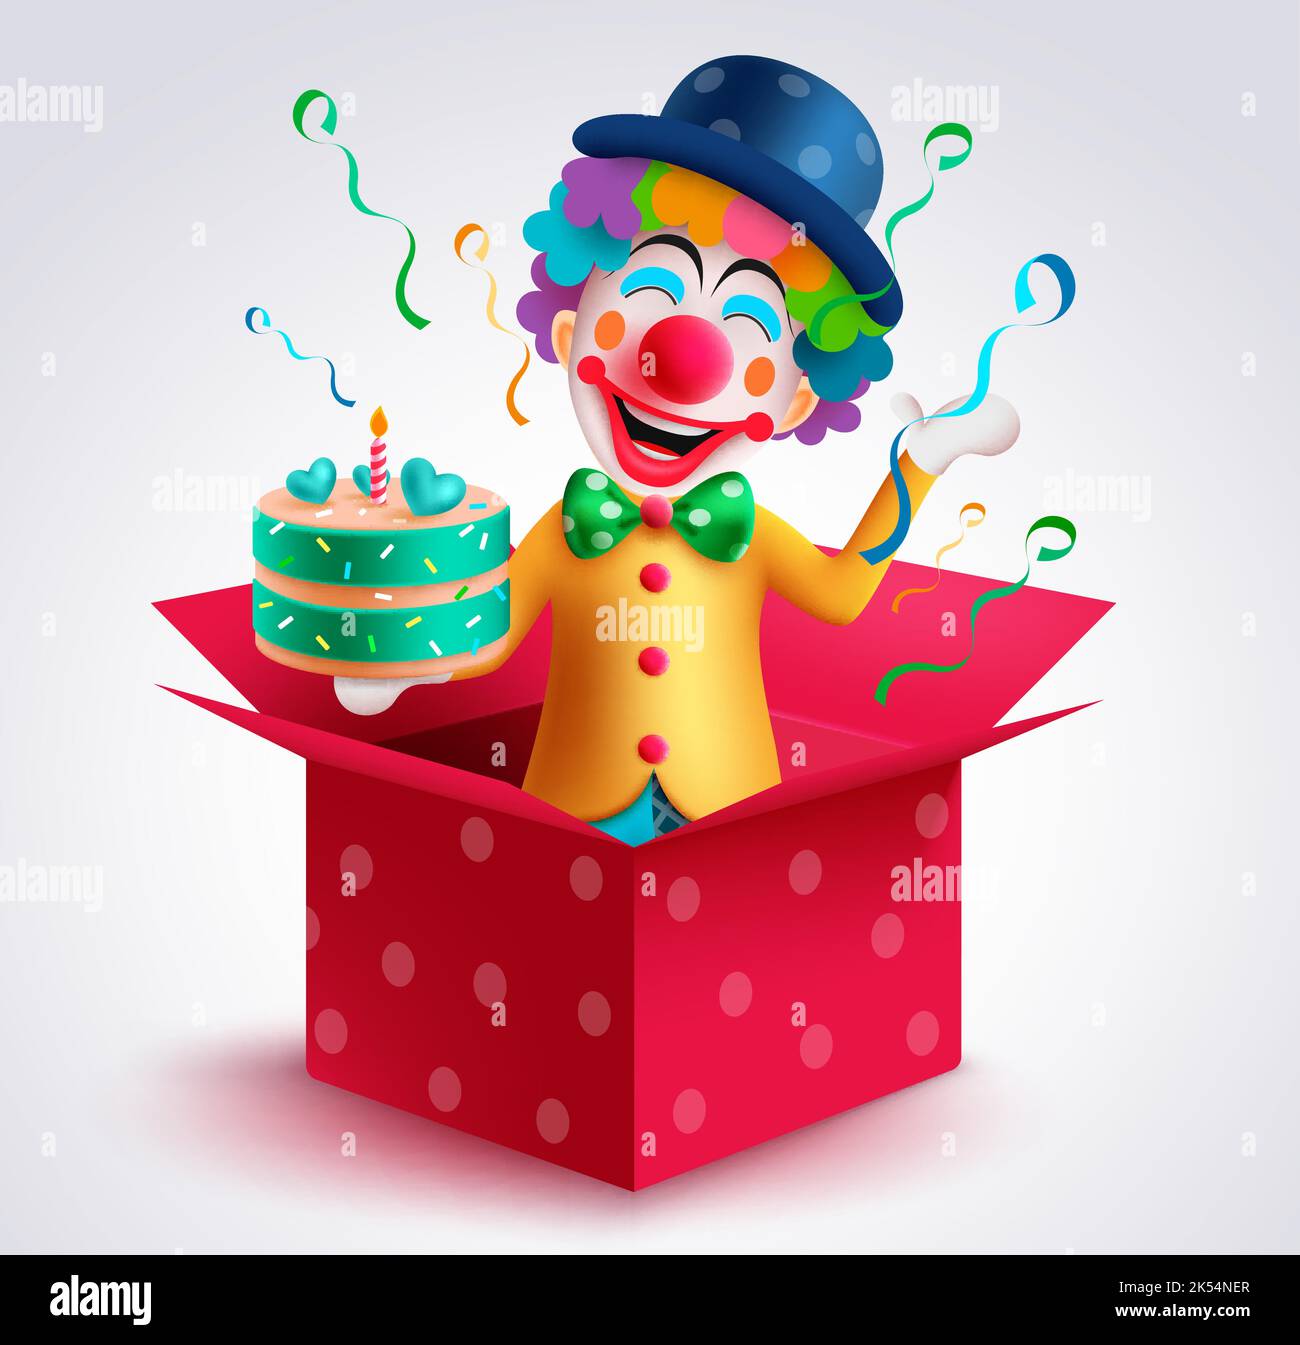 Clown character vector design. Birthday buffoon character wearing colorful party costume holding yummy cake inside the surprise gift box concept. Stock Vector